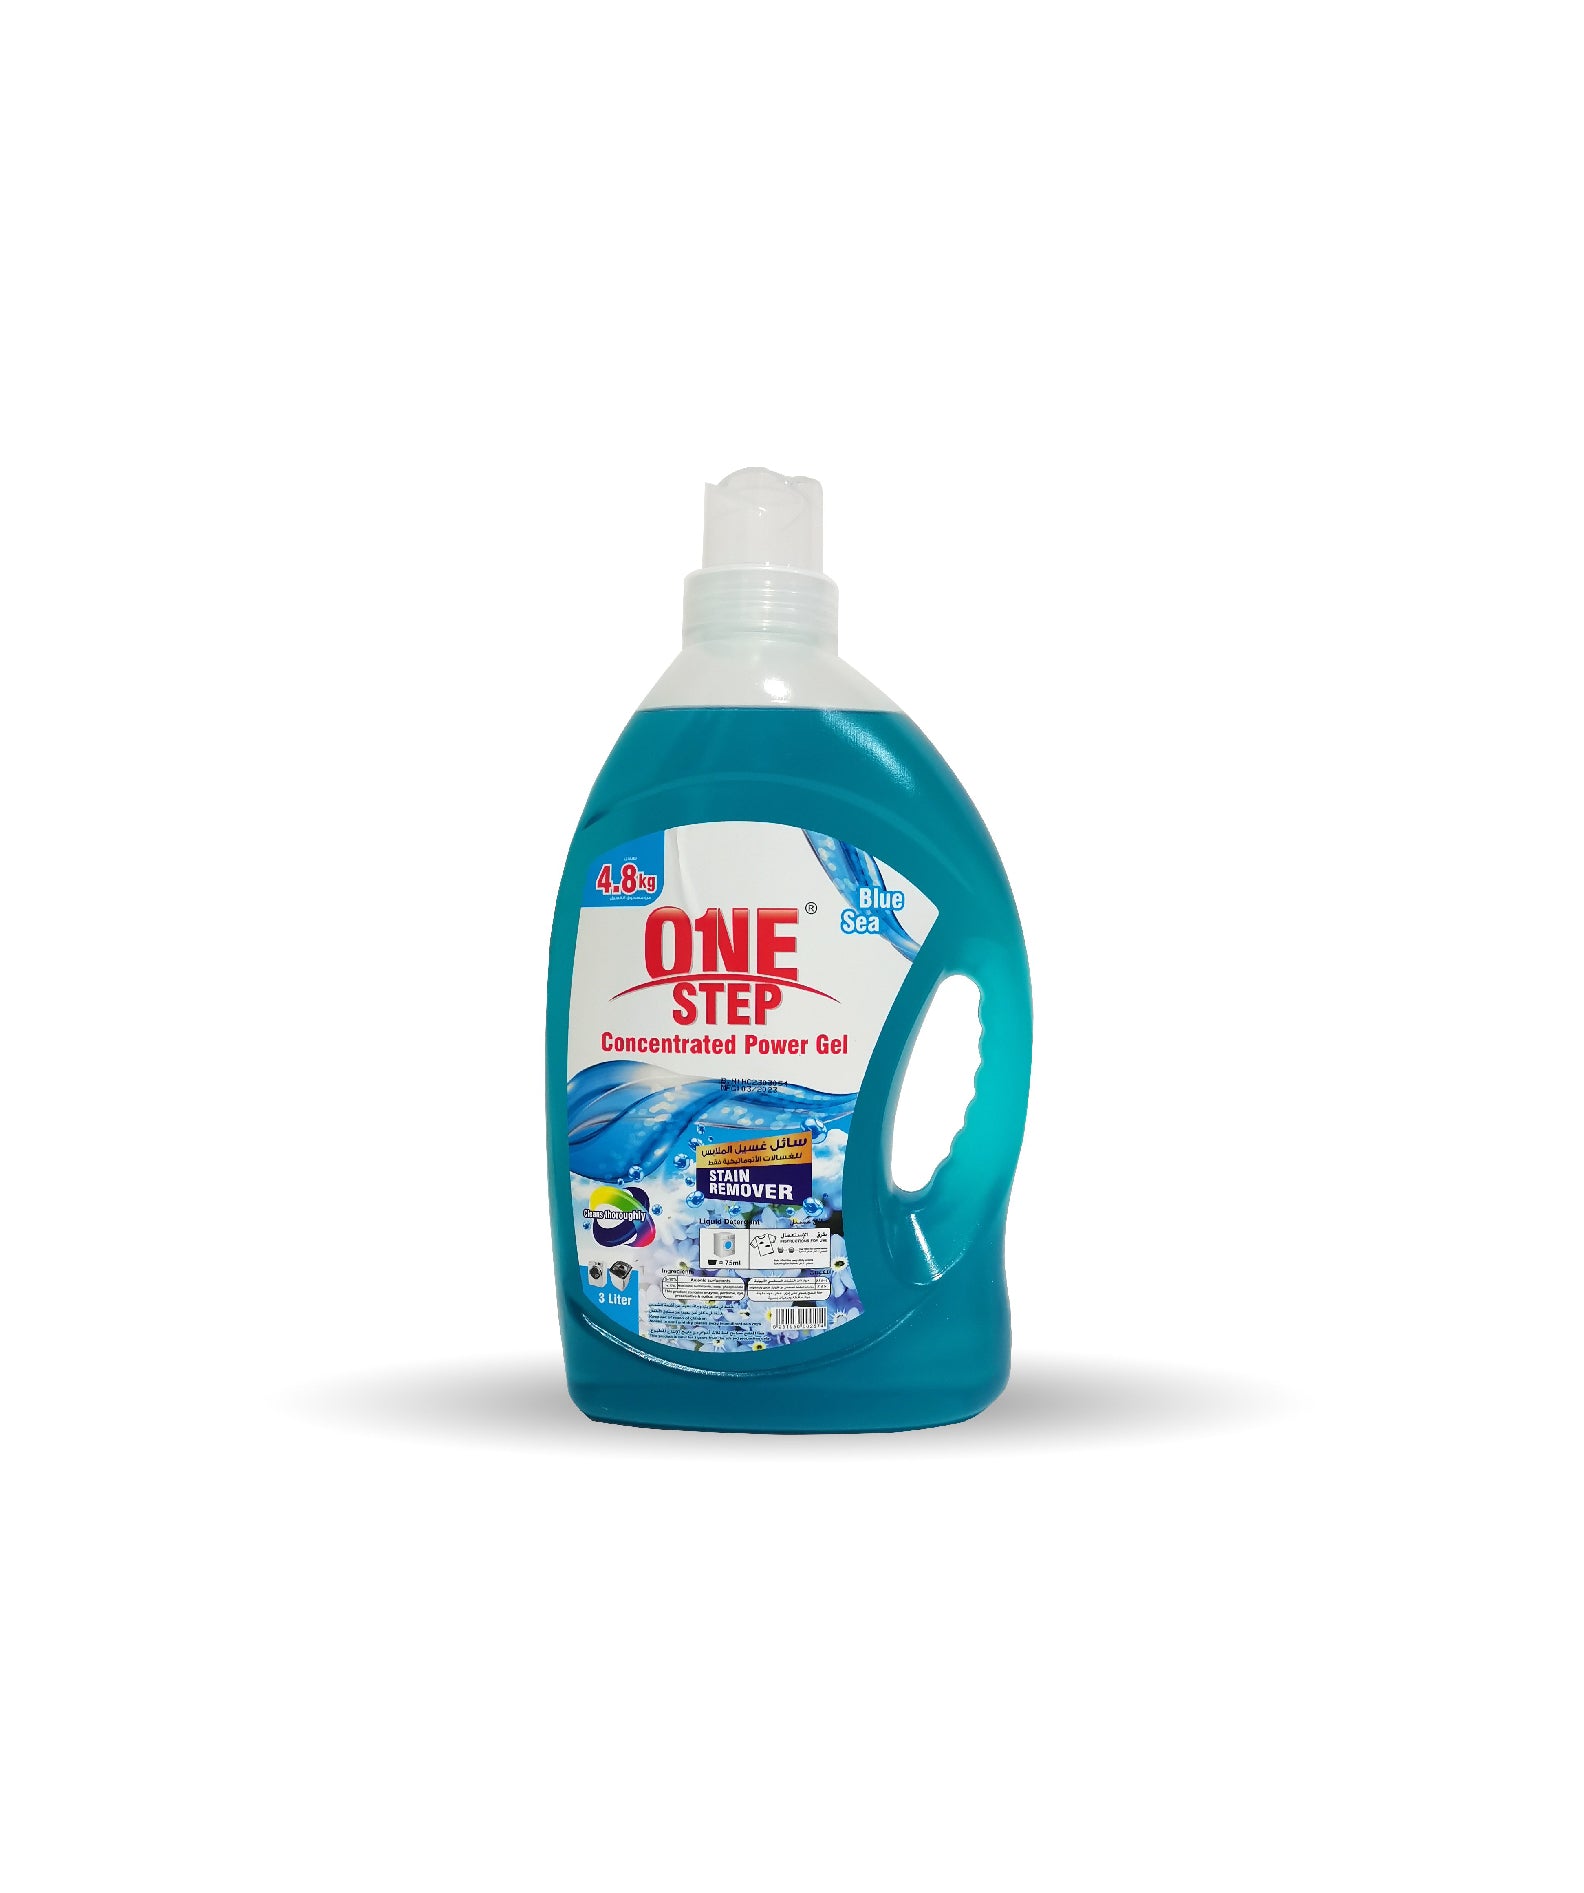 One Step Engine Oil Cleaner and Remover 500 ml